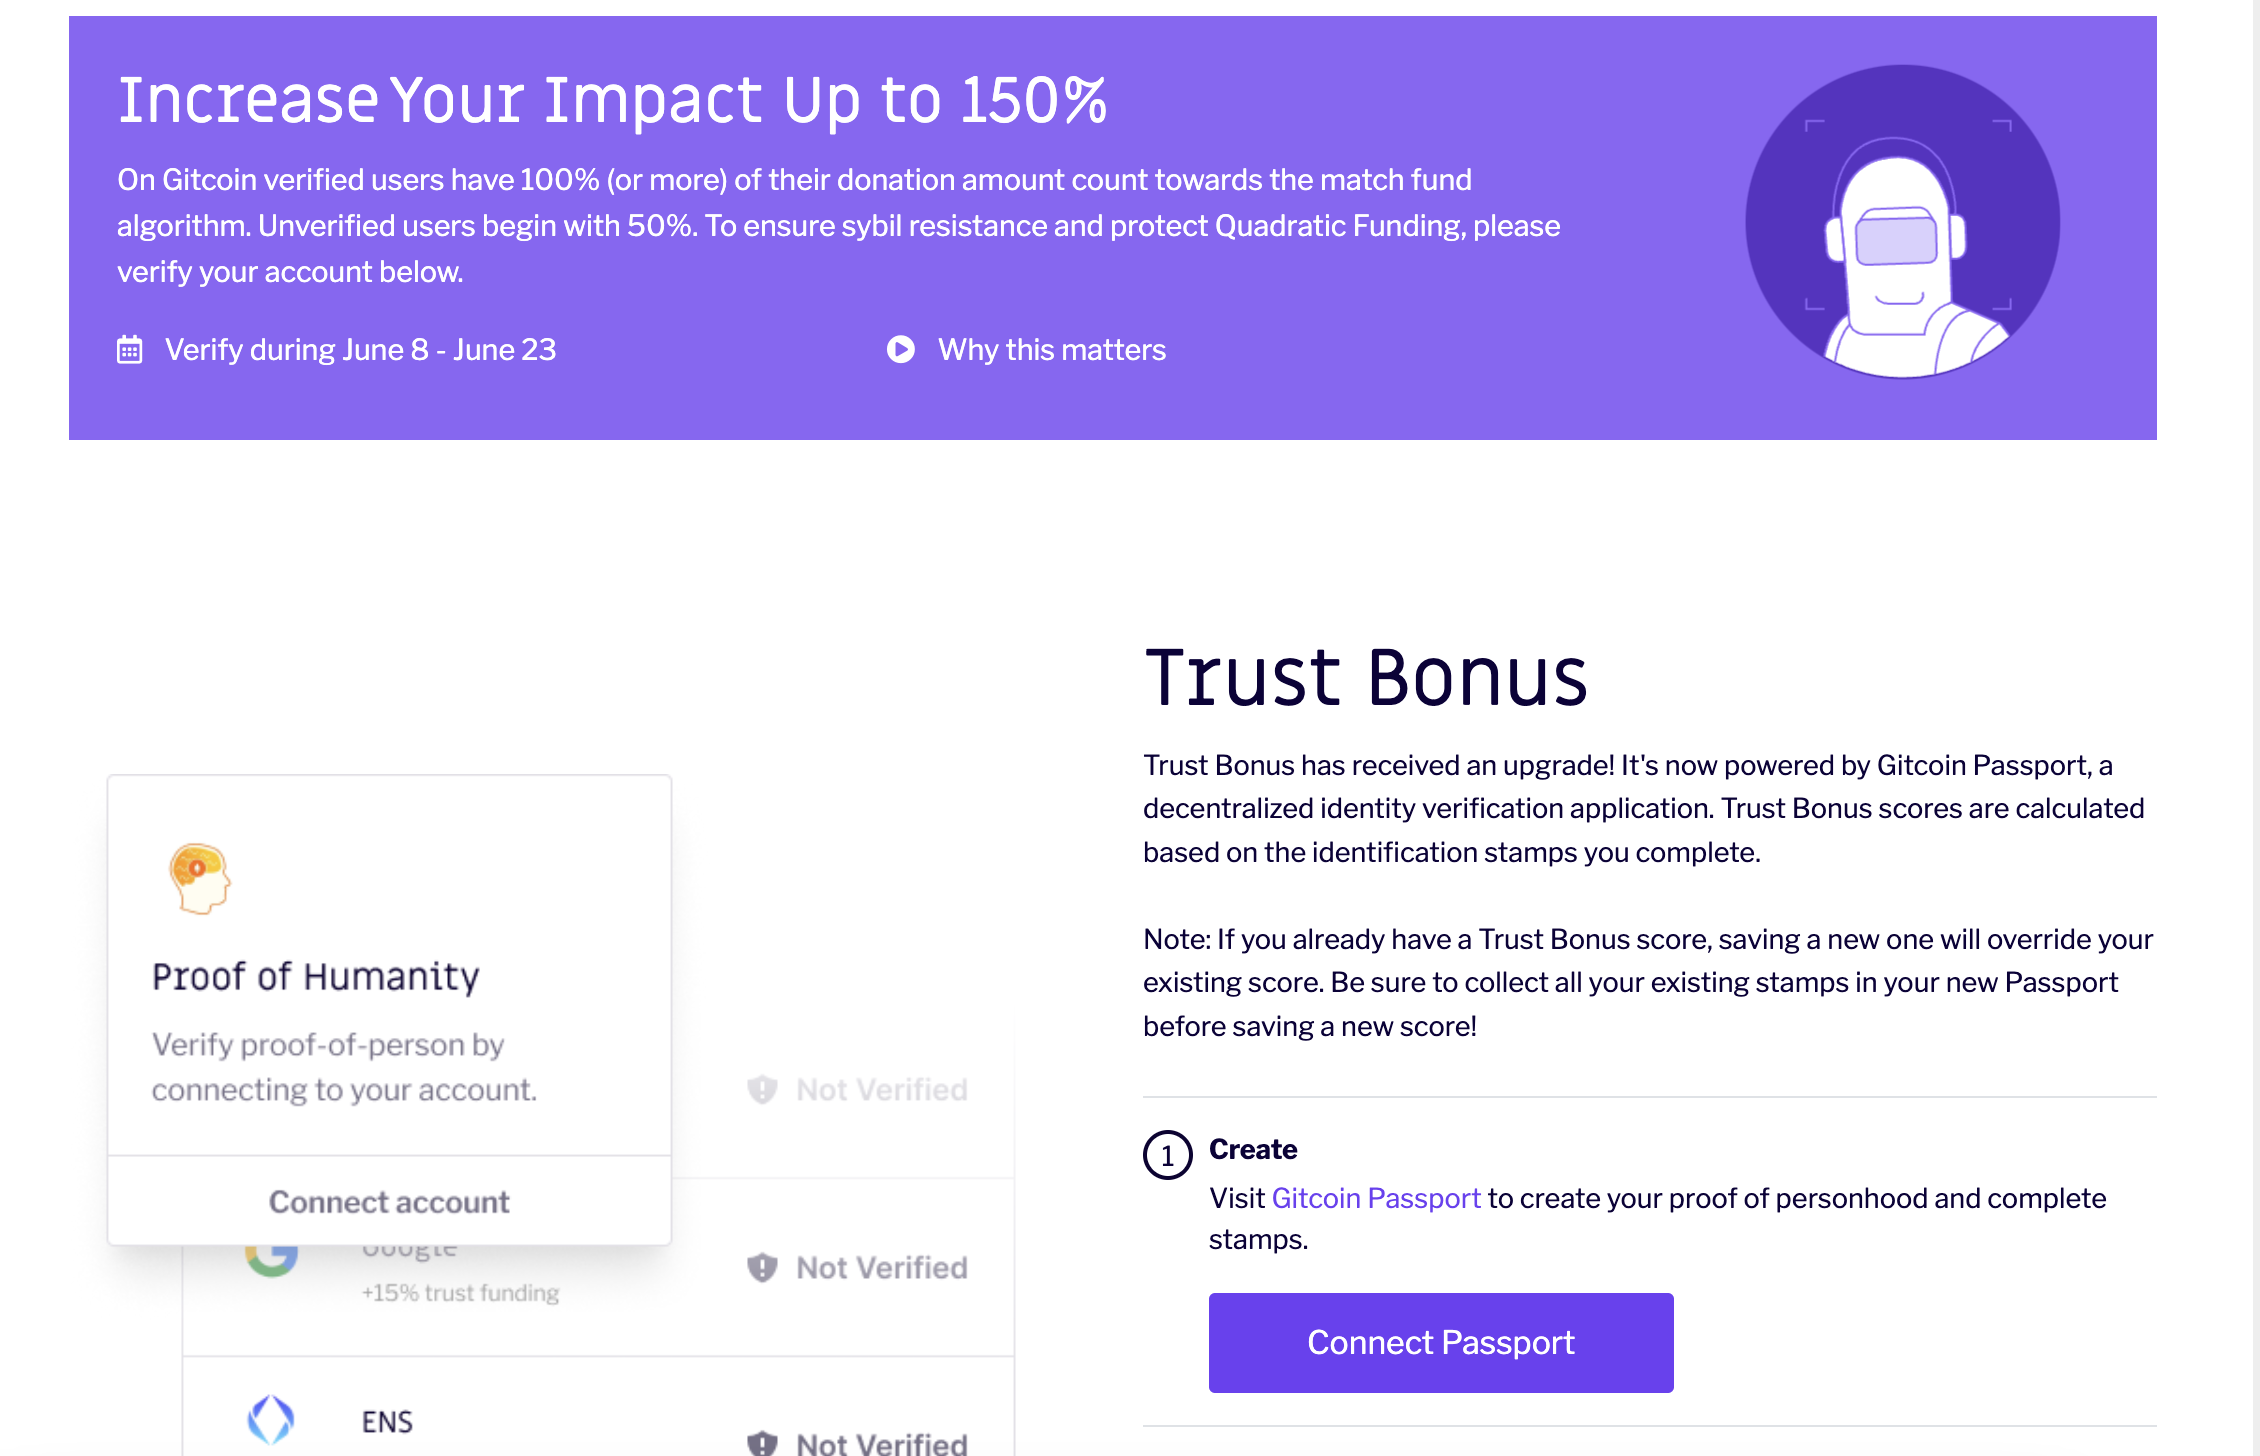 Connect Passport so your contribution can receive a trust bonus